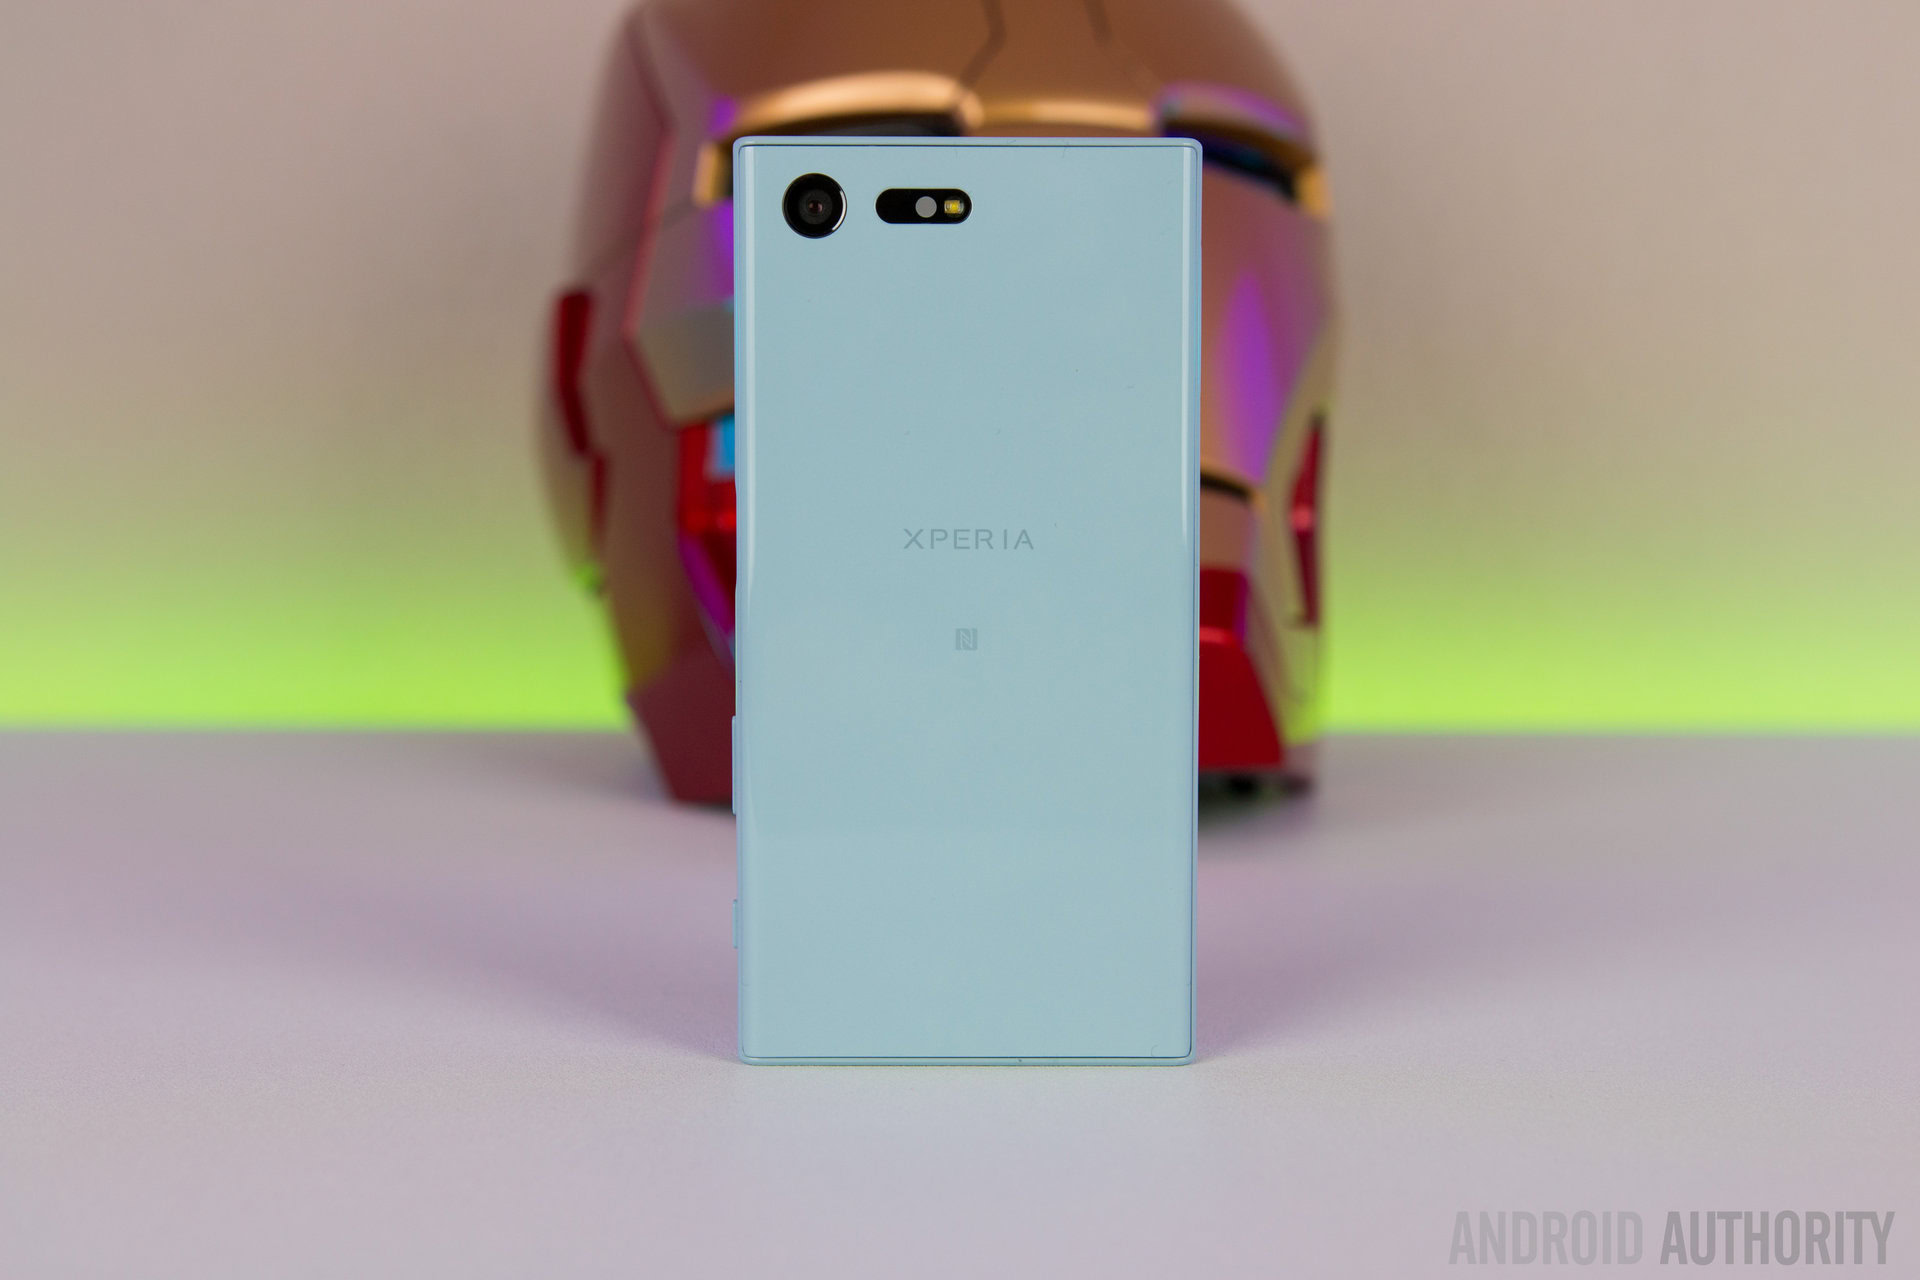 Sony Xperia X - Android Authority